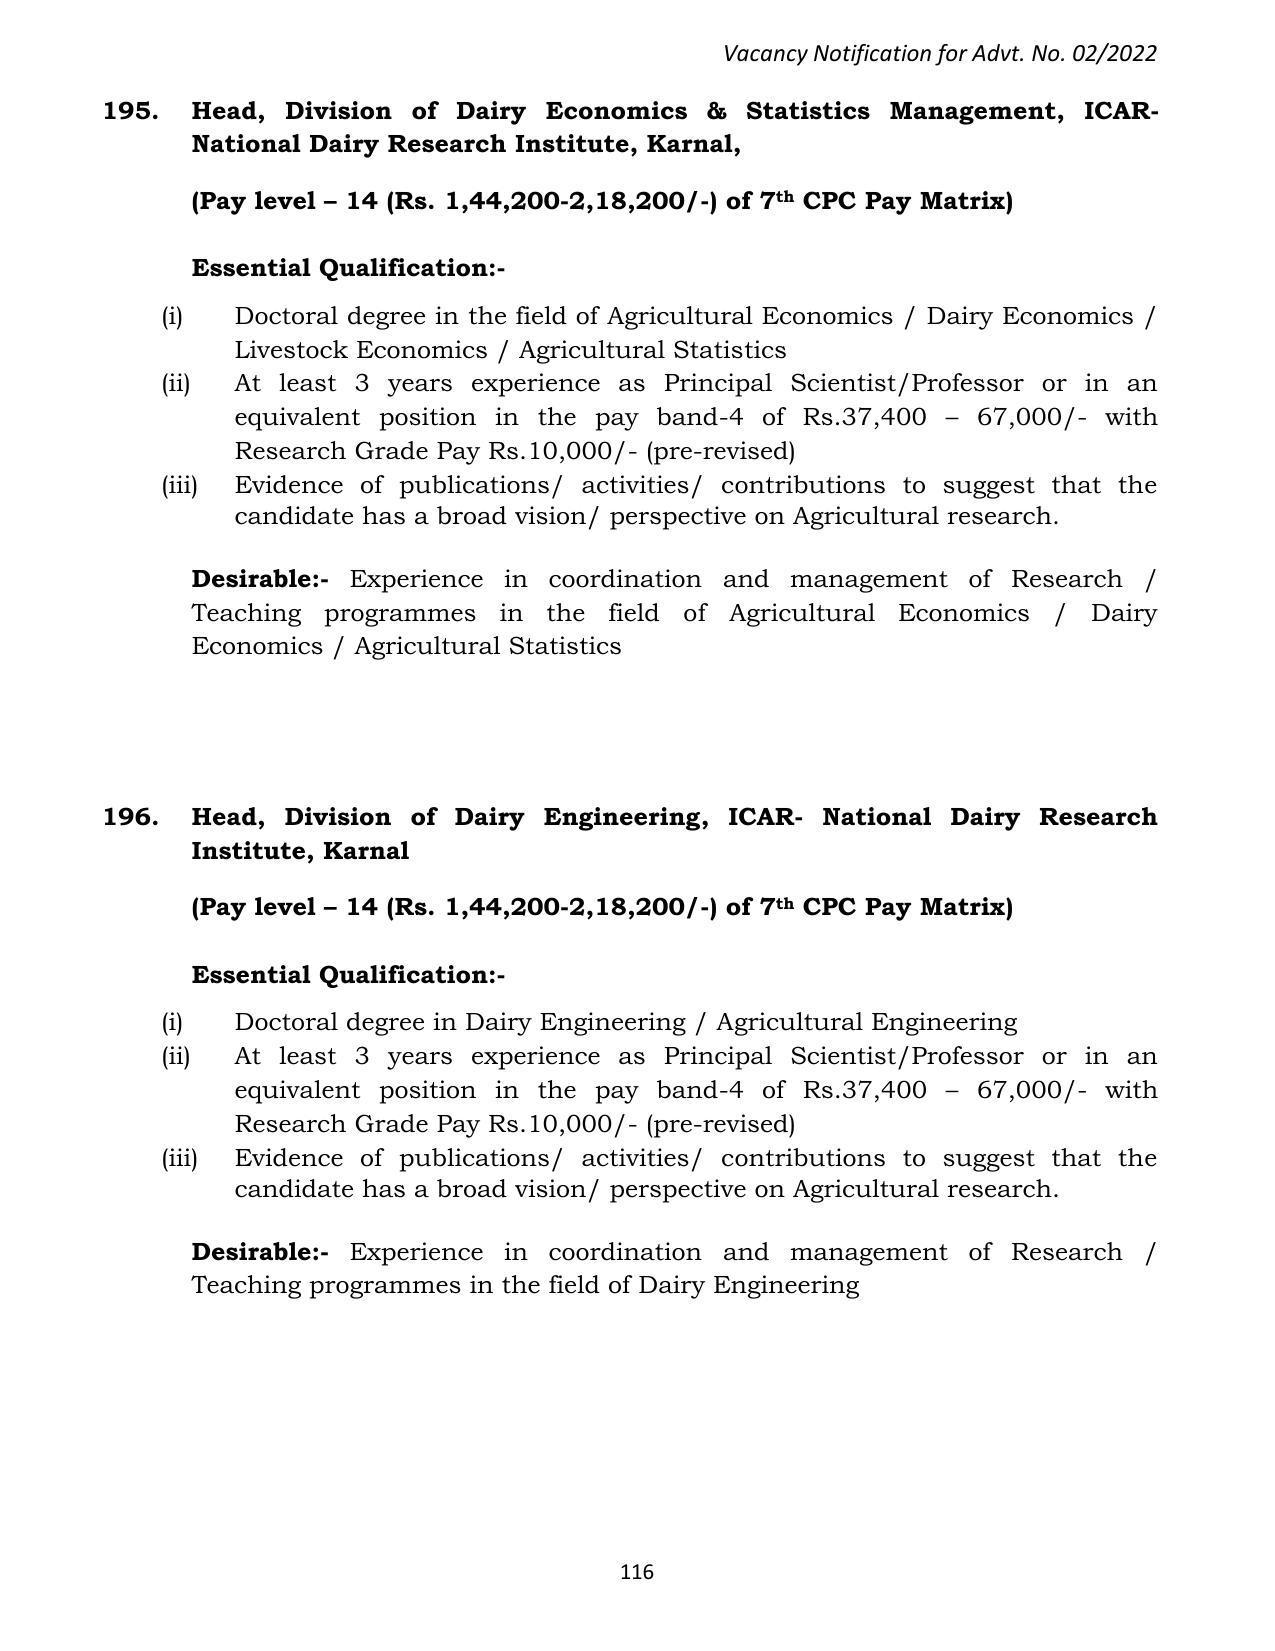 ASRB Non-Research Management Recruitment 2022 - Page 103